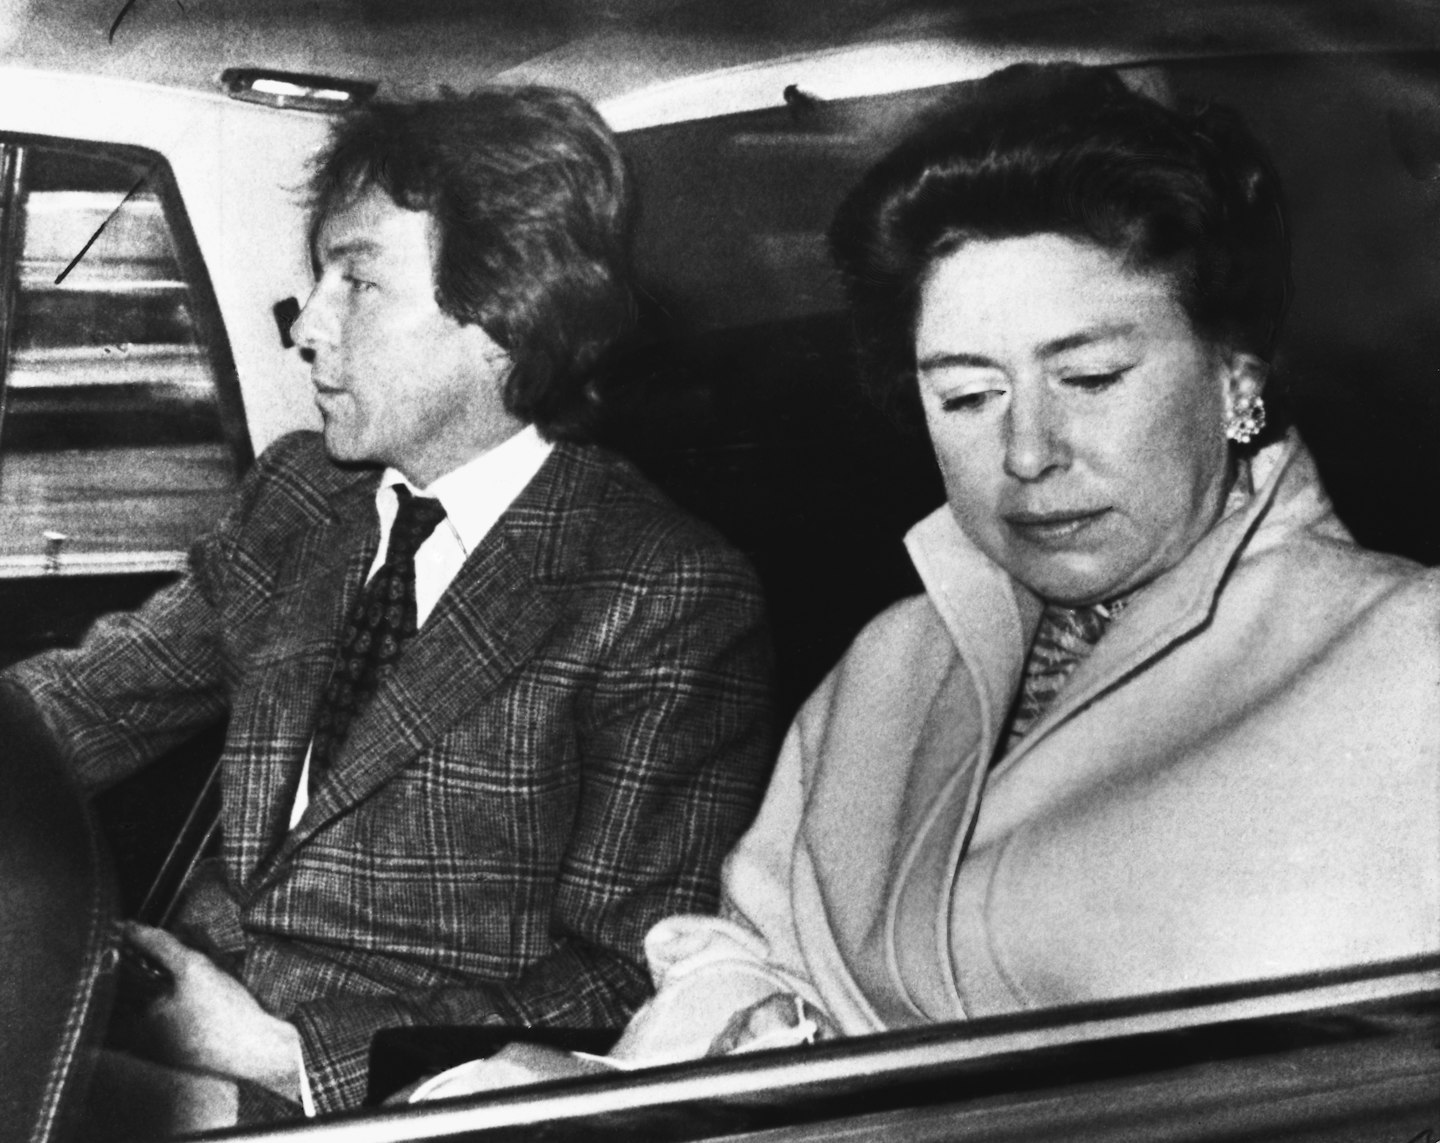 ...And Princess Margaret's affair with Roddy Llewellyn